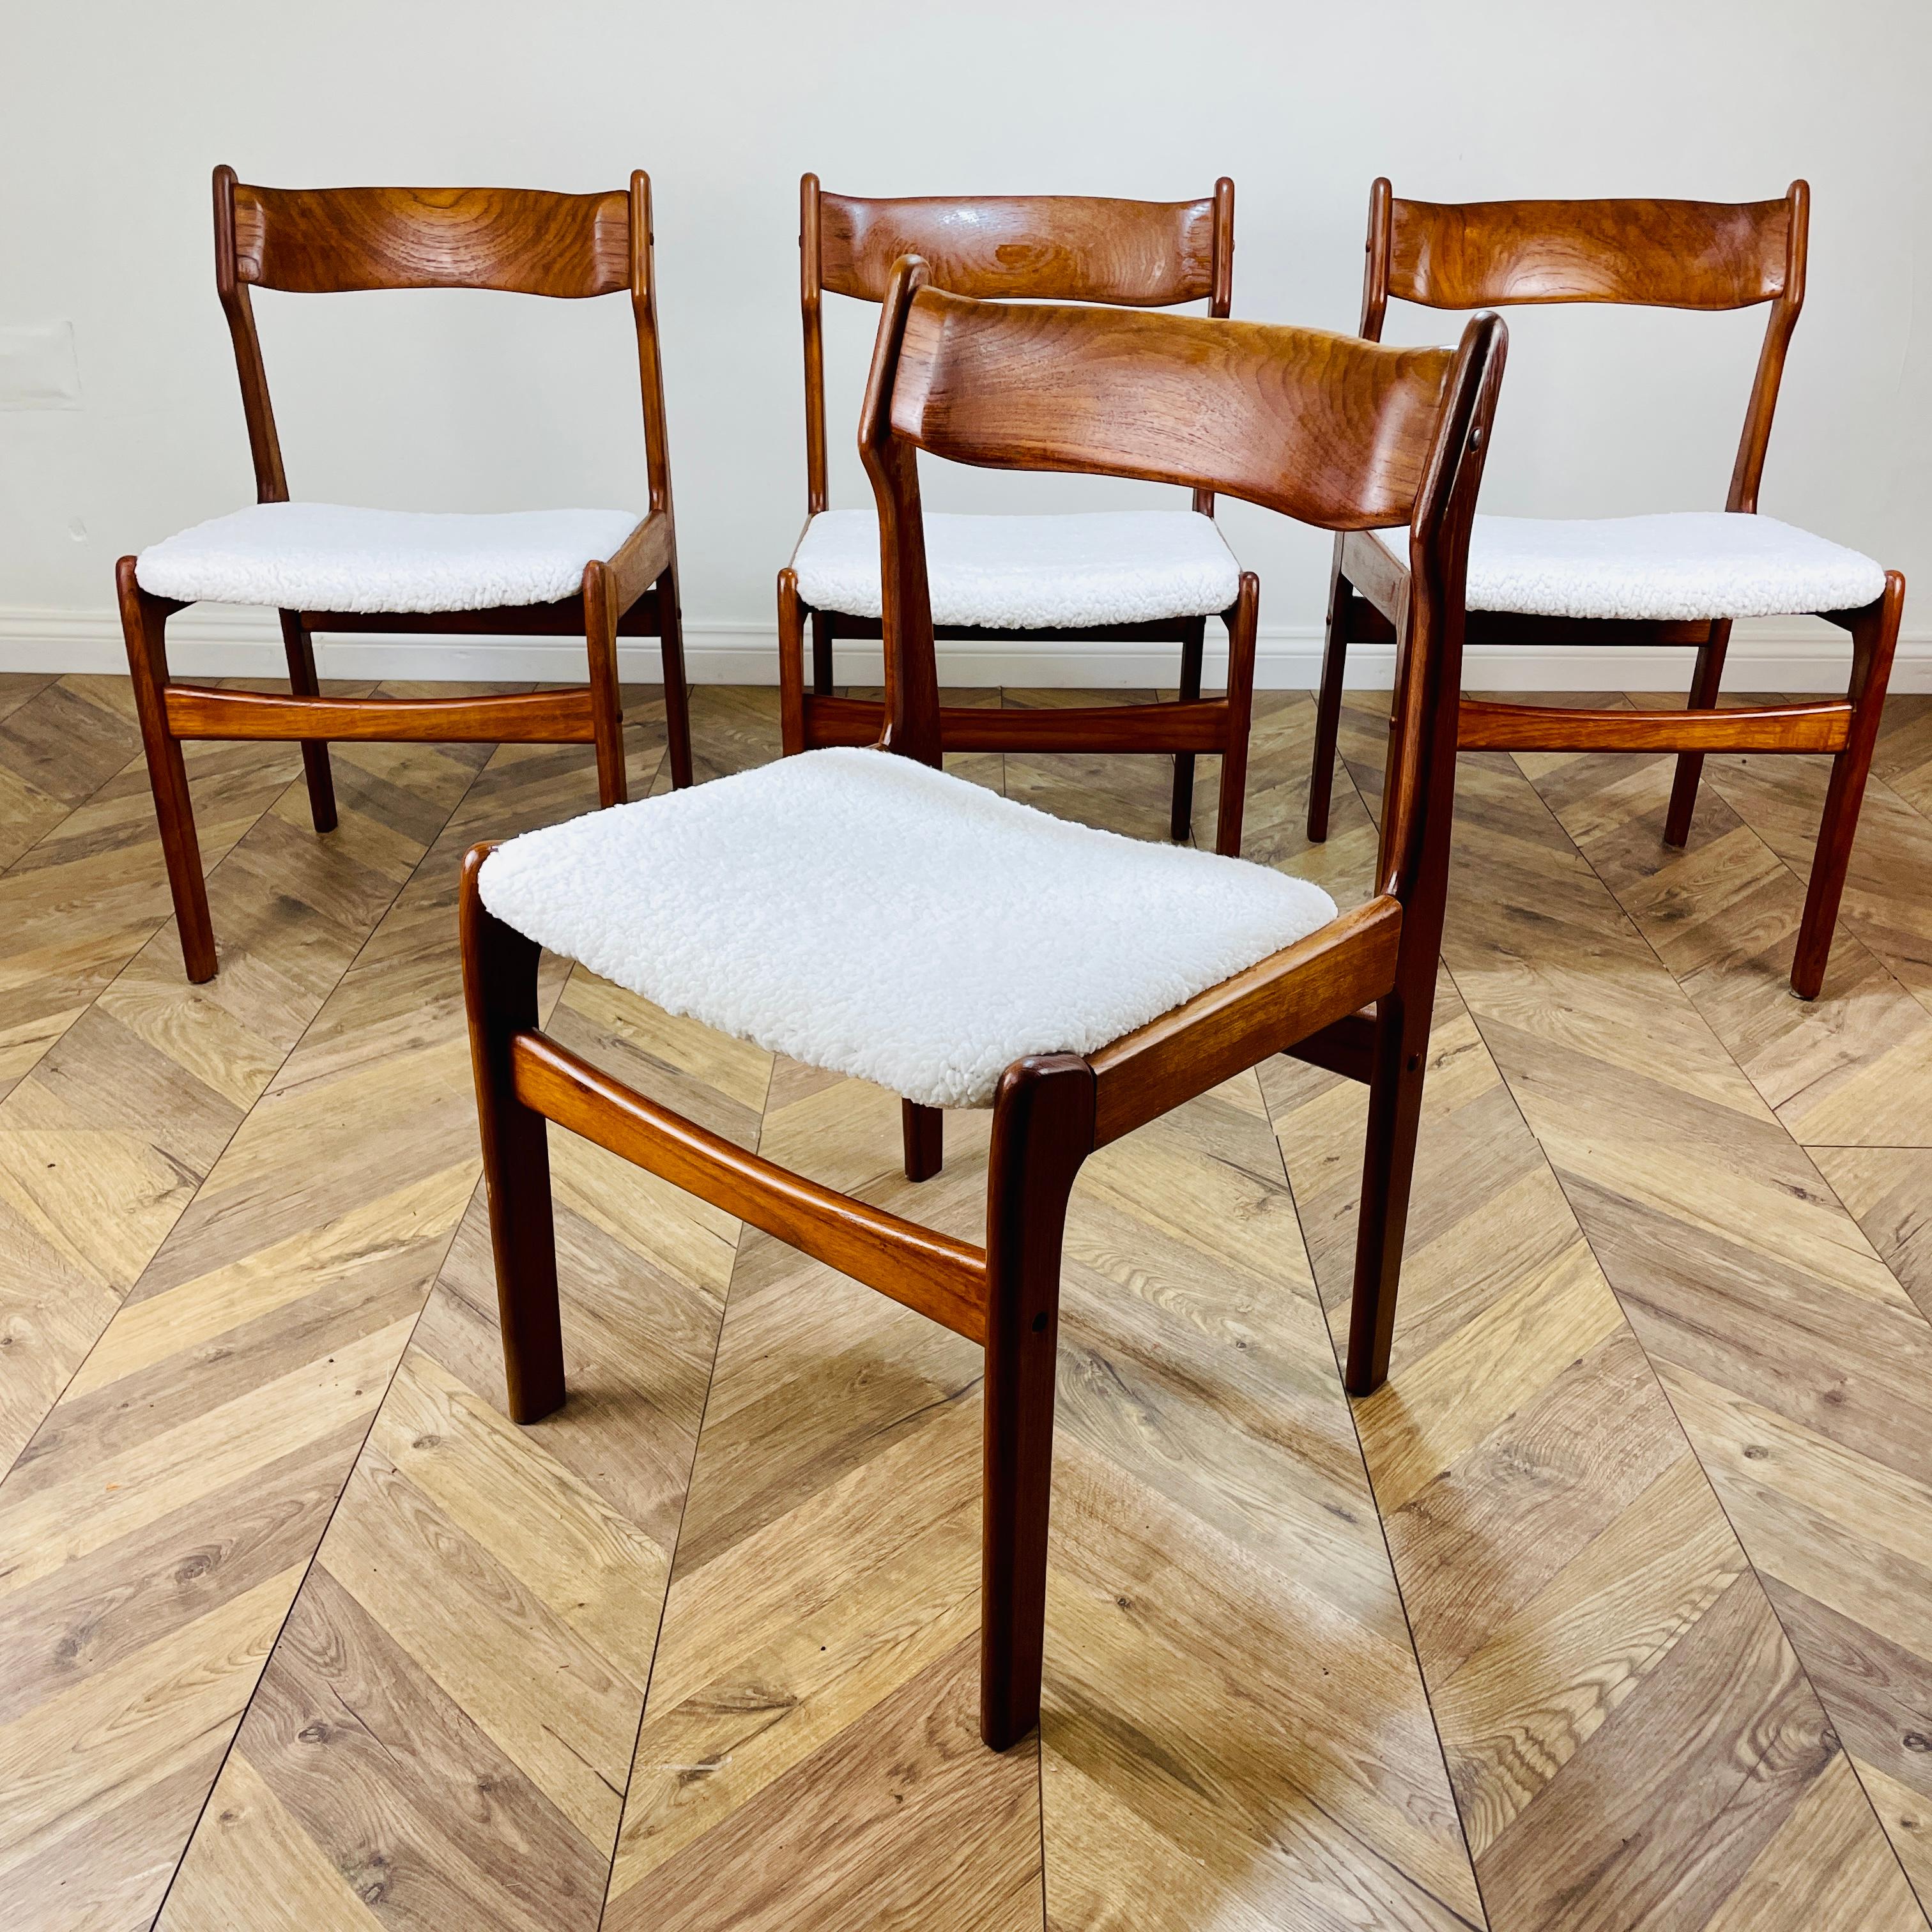 A Beautiful Set of 4, Teak Danish Dining Chairs Inspired by Erik Buch and manufactured in the 1970s.

The chair frames are all solid & completely original, in good overall condition with signs of use, in the form of scratches and abrasions,